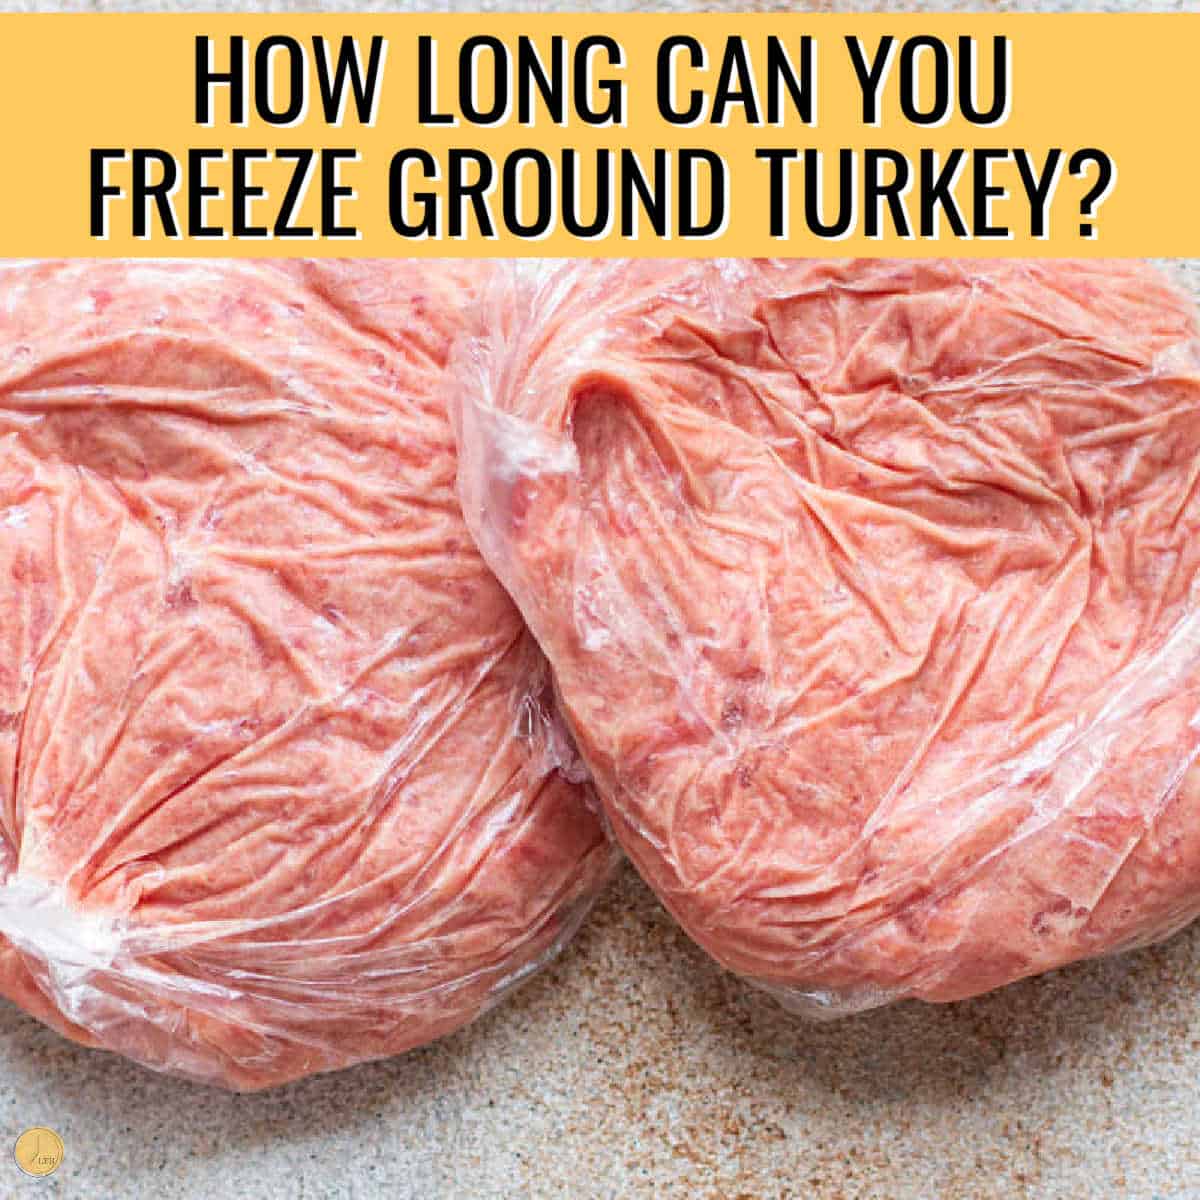 two packages of frozen ground turkey on marble with yellow stripe and text "how long can you freeze ground turkey?"